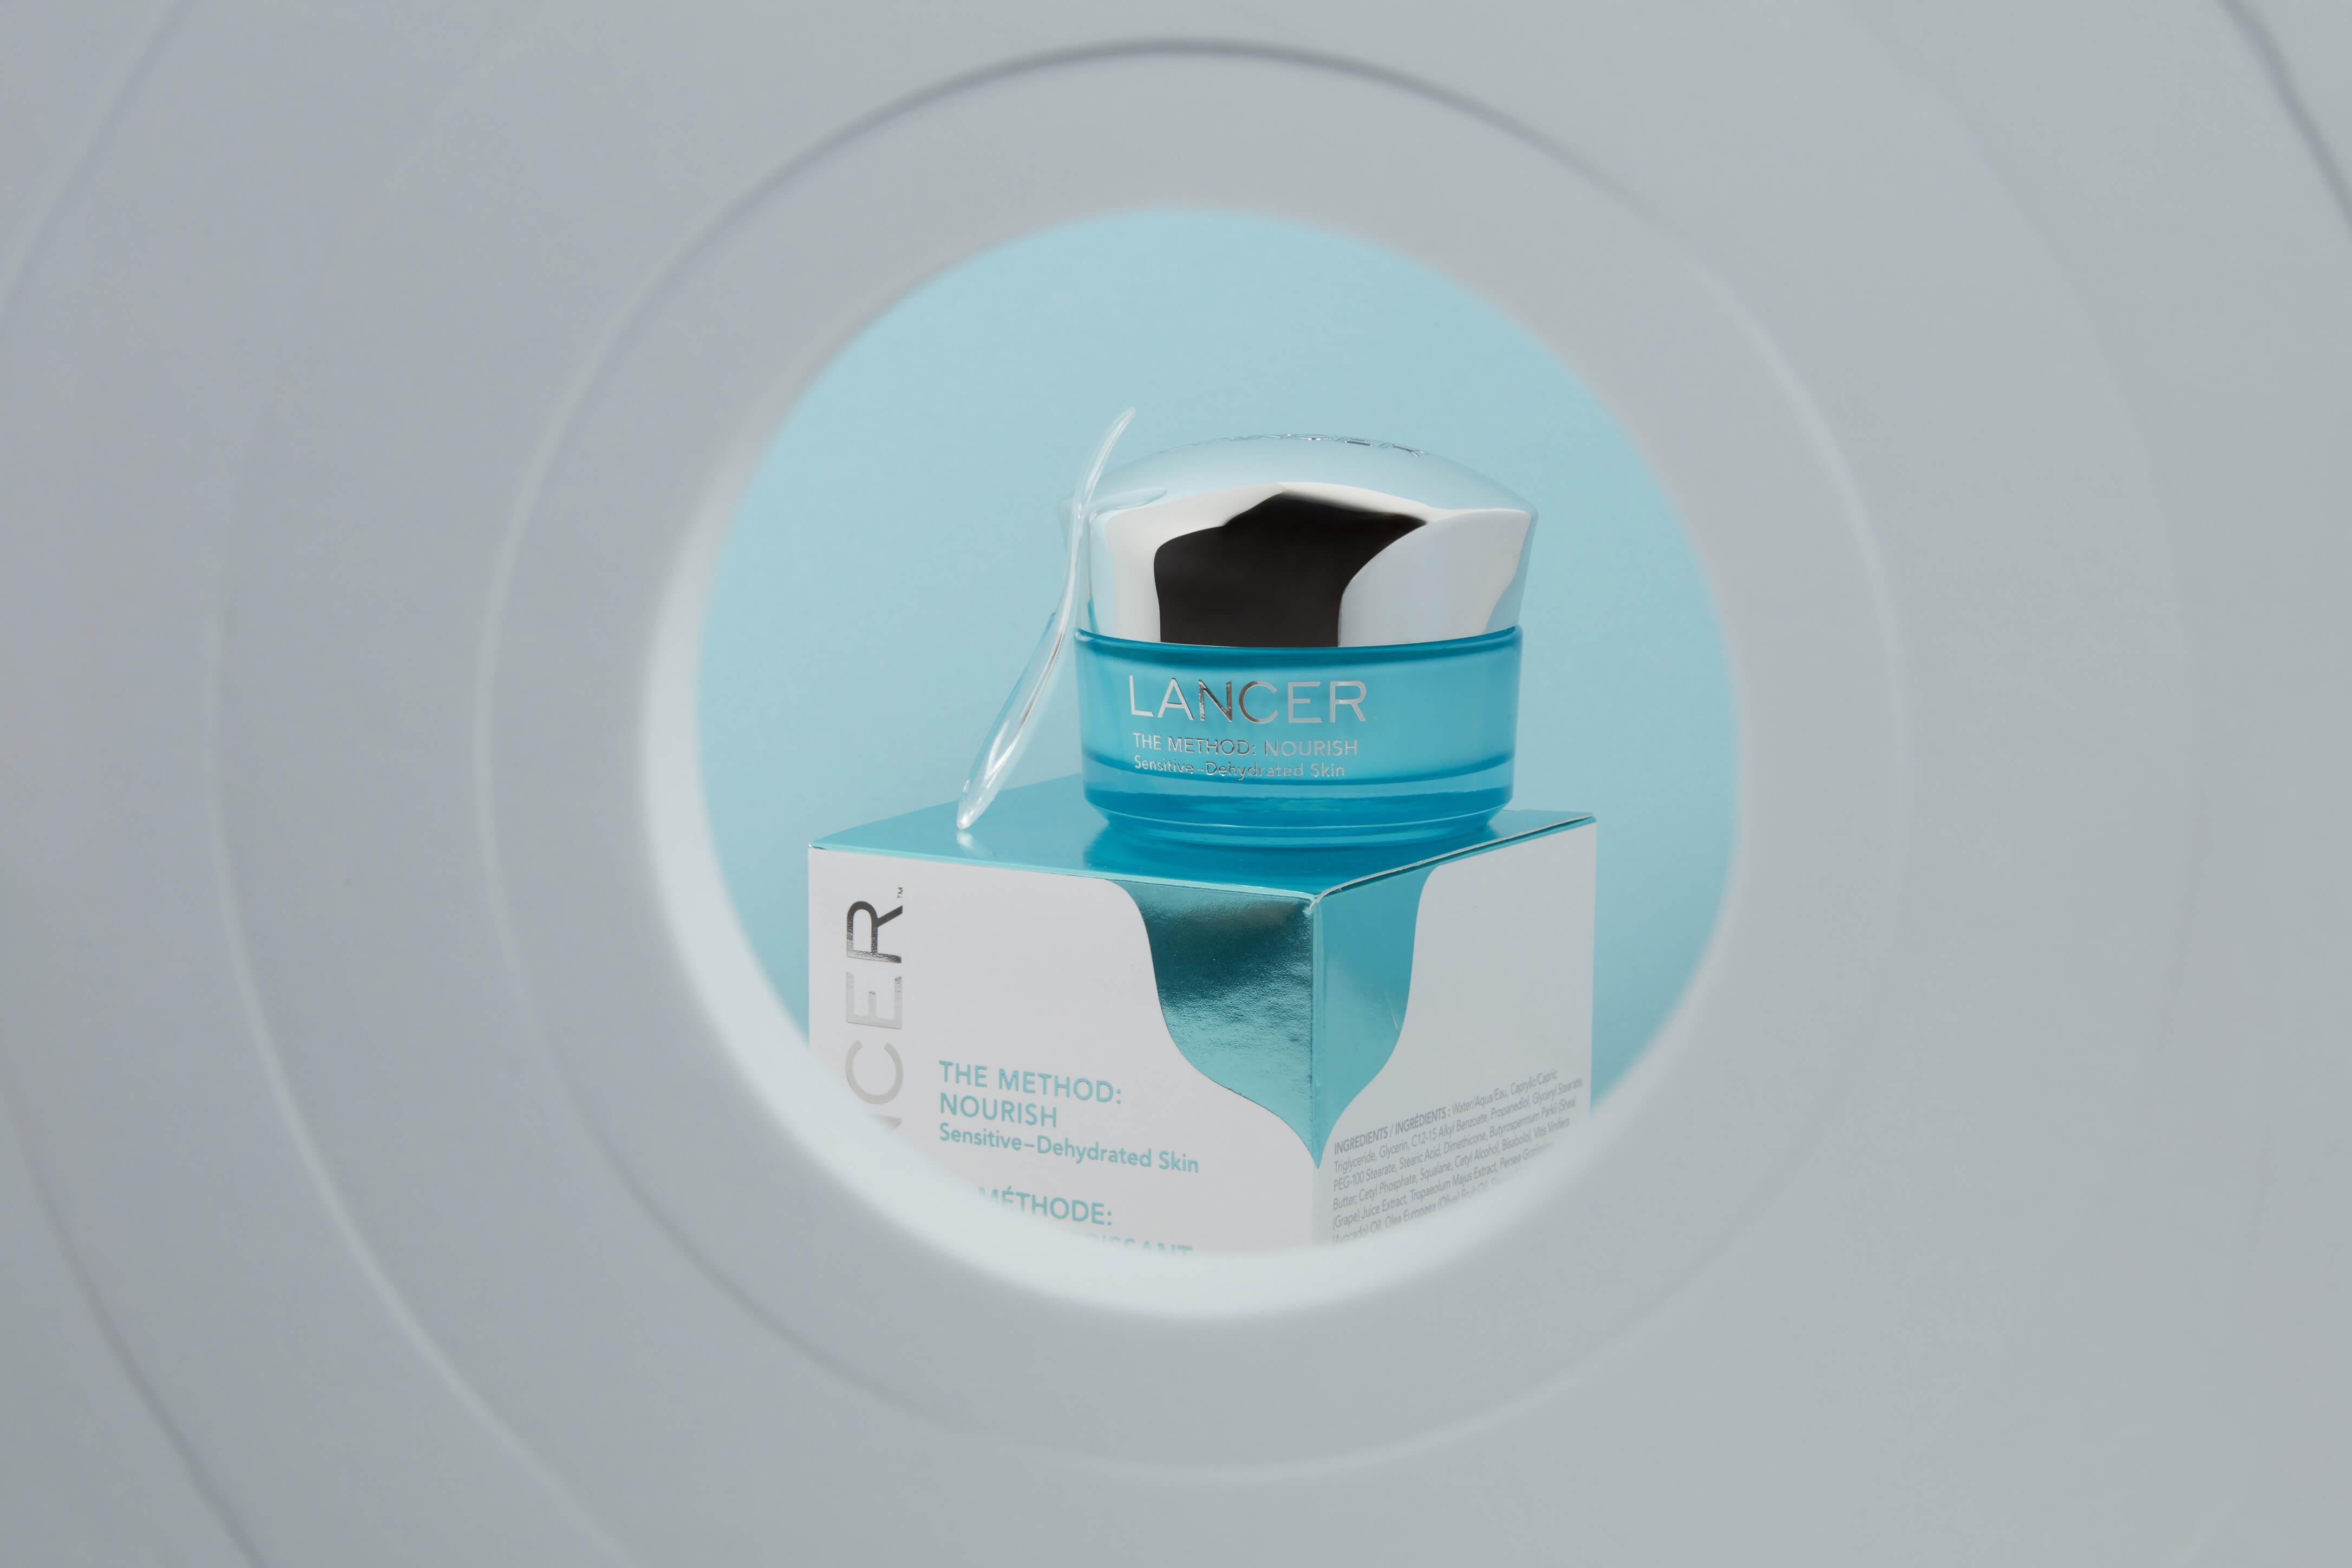 Image of a Lancer beauty product in blue color